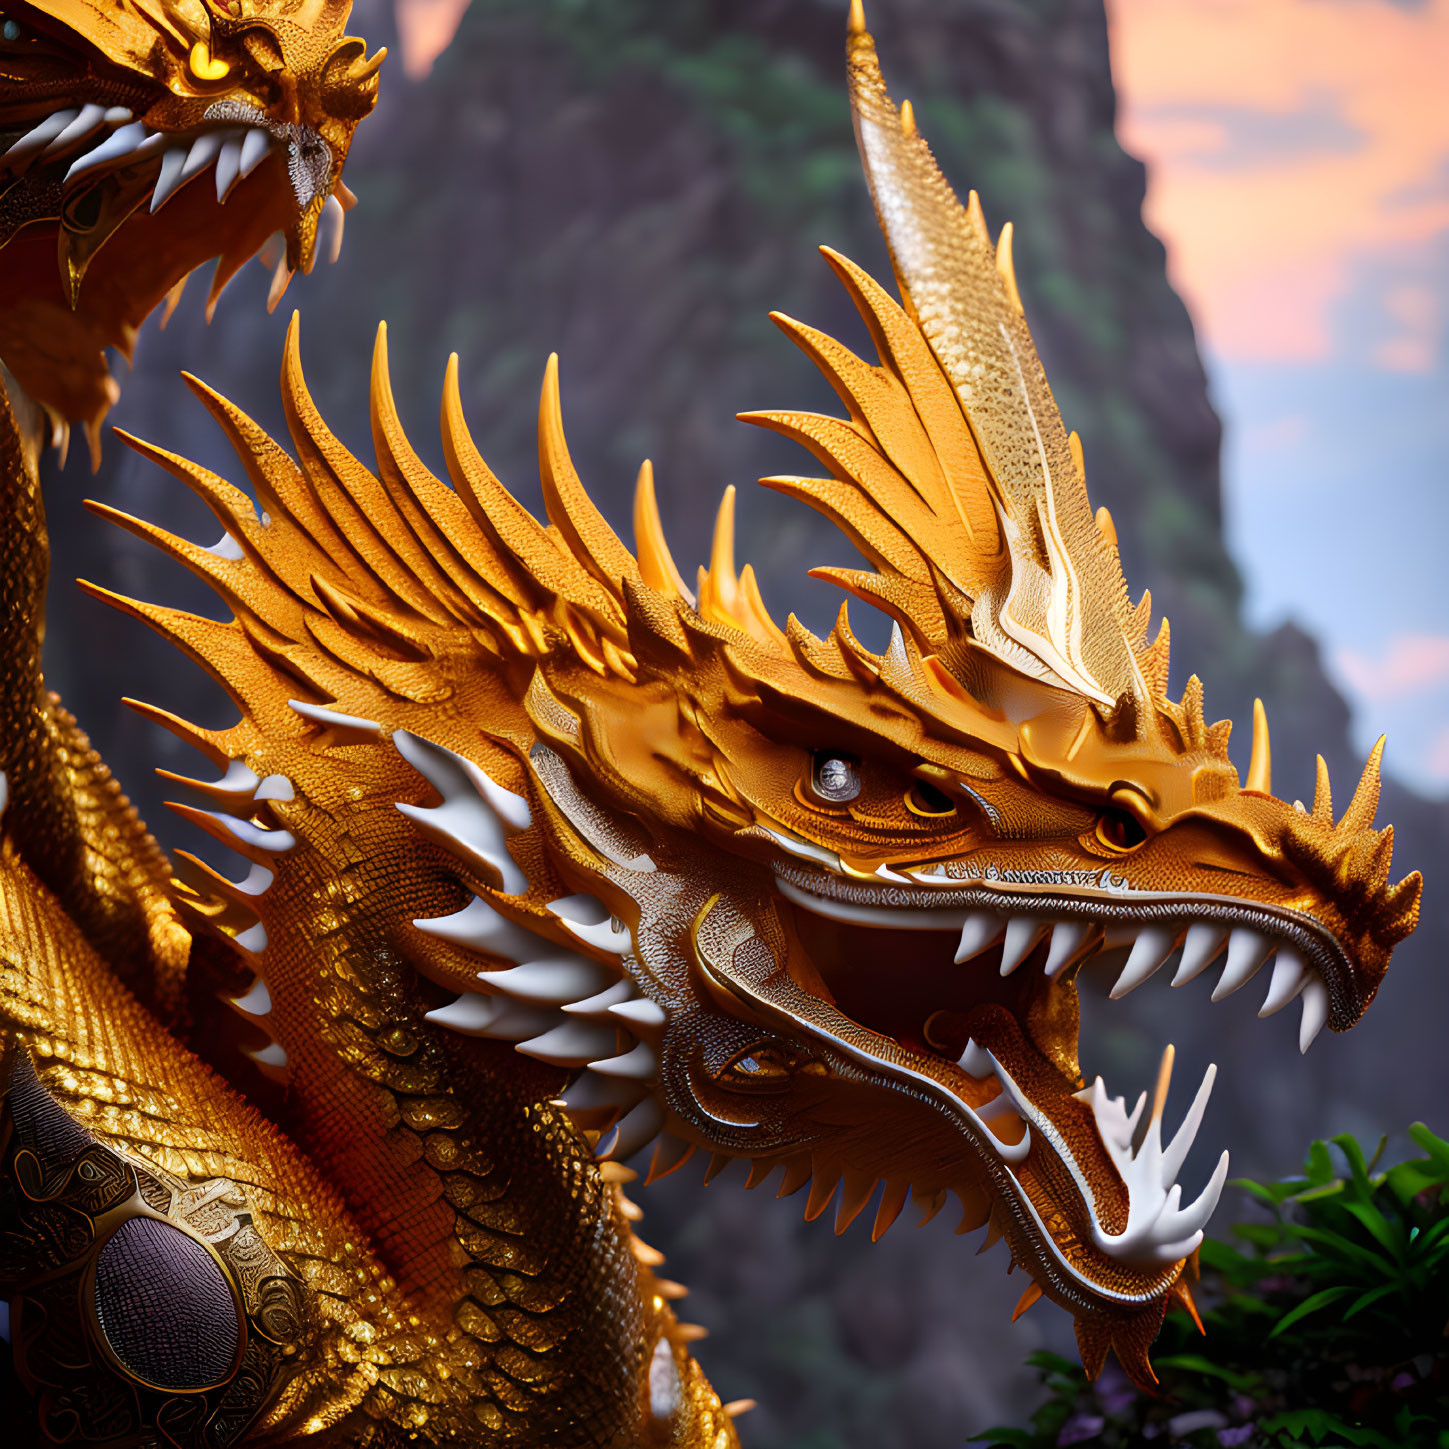 Golden multi-headed dragon with intricate scales and sharp horns in mountainous sunset scene